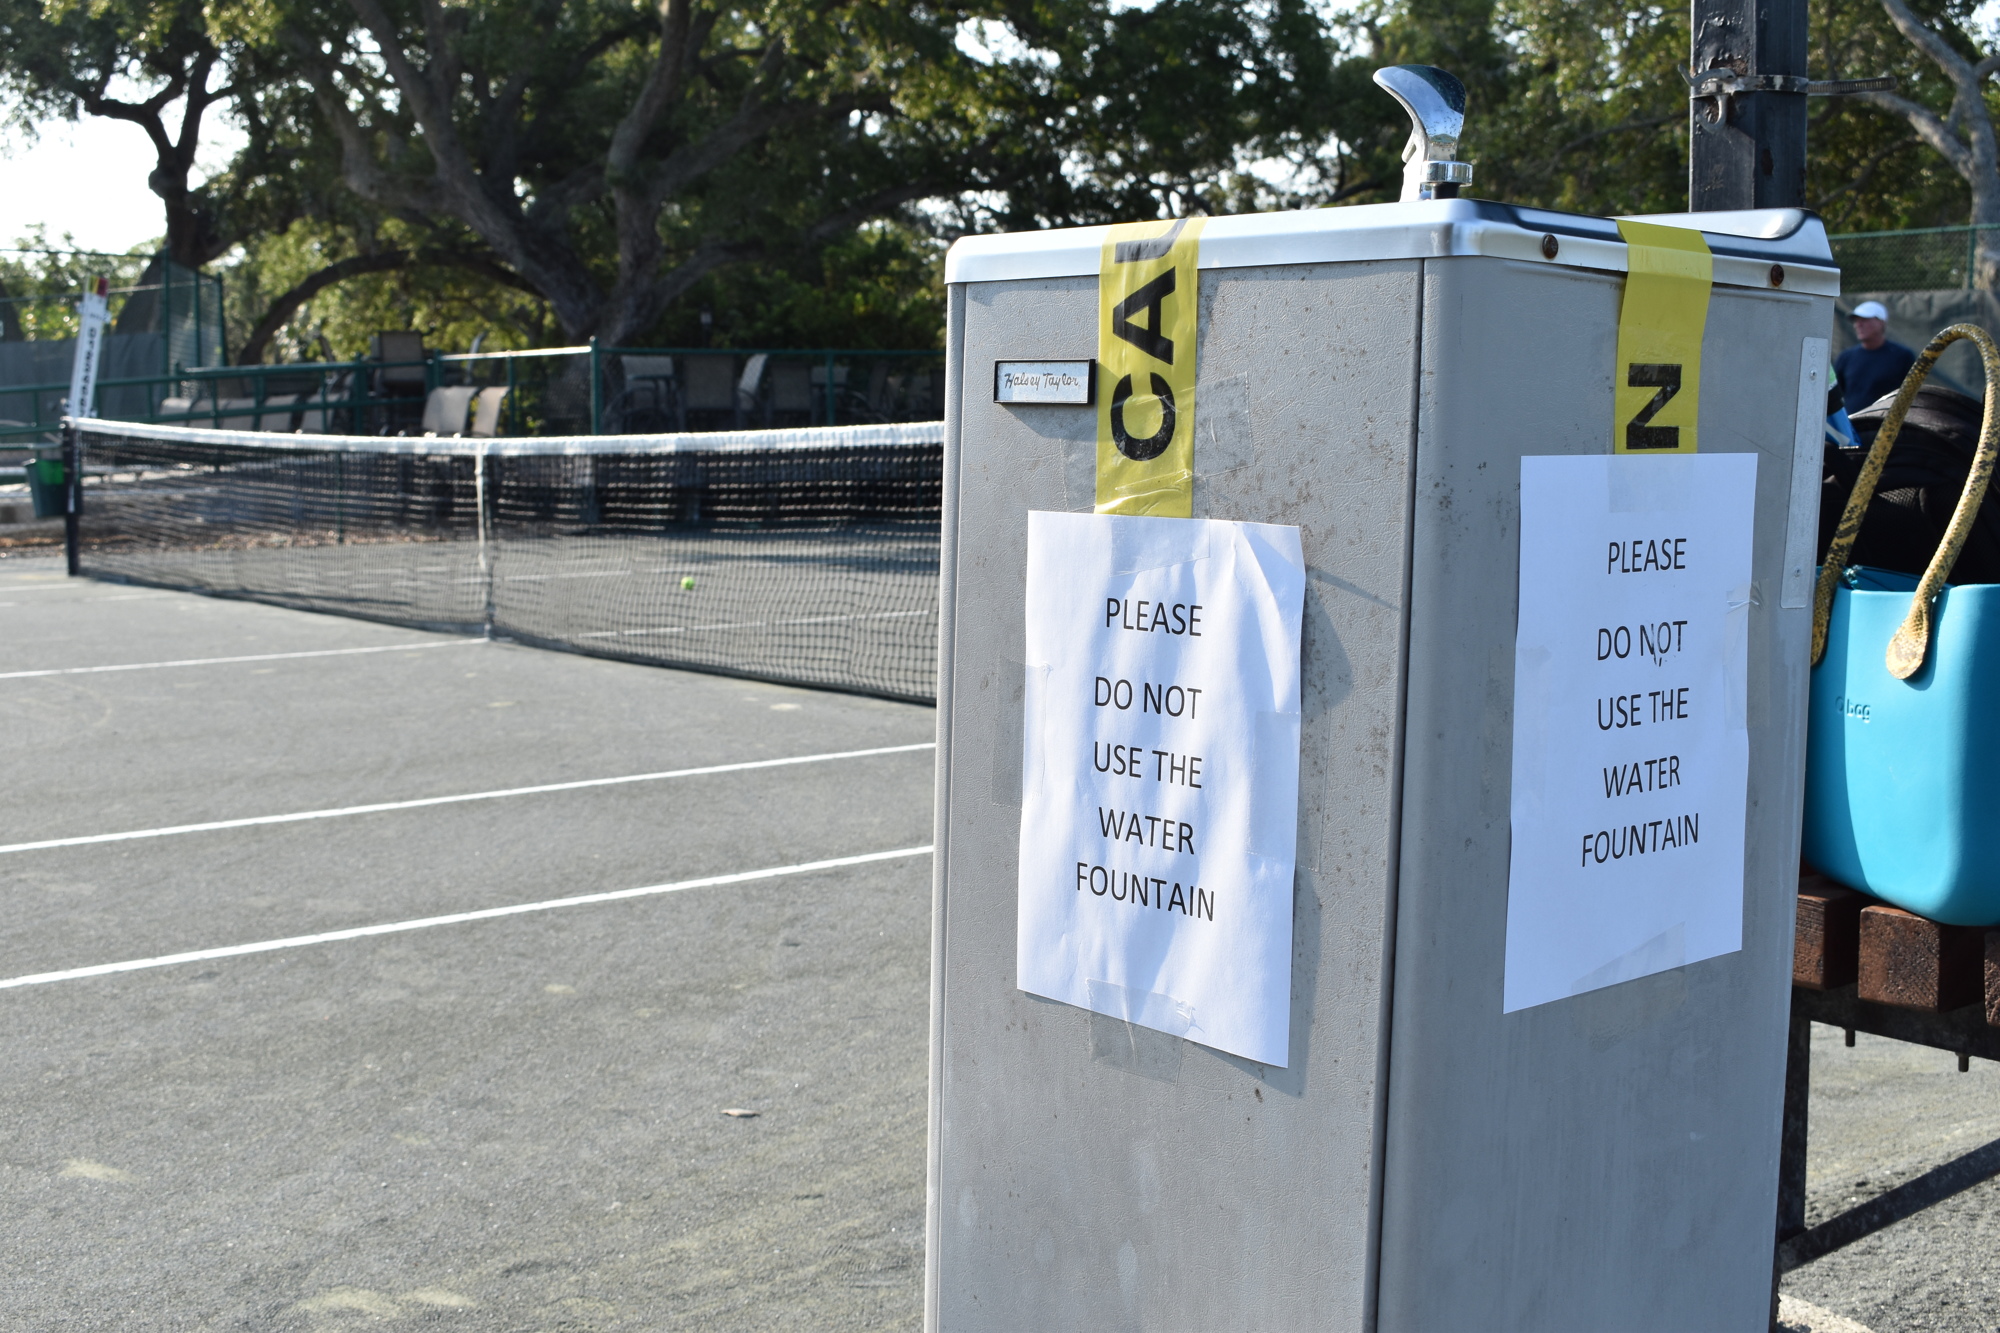 A sign warns members of the Longboat Key Tennis Center not to use the drinking fountains while restrictions are in place because of the COVID-19 pandemic.